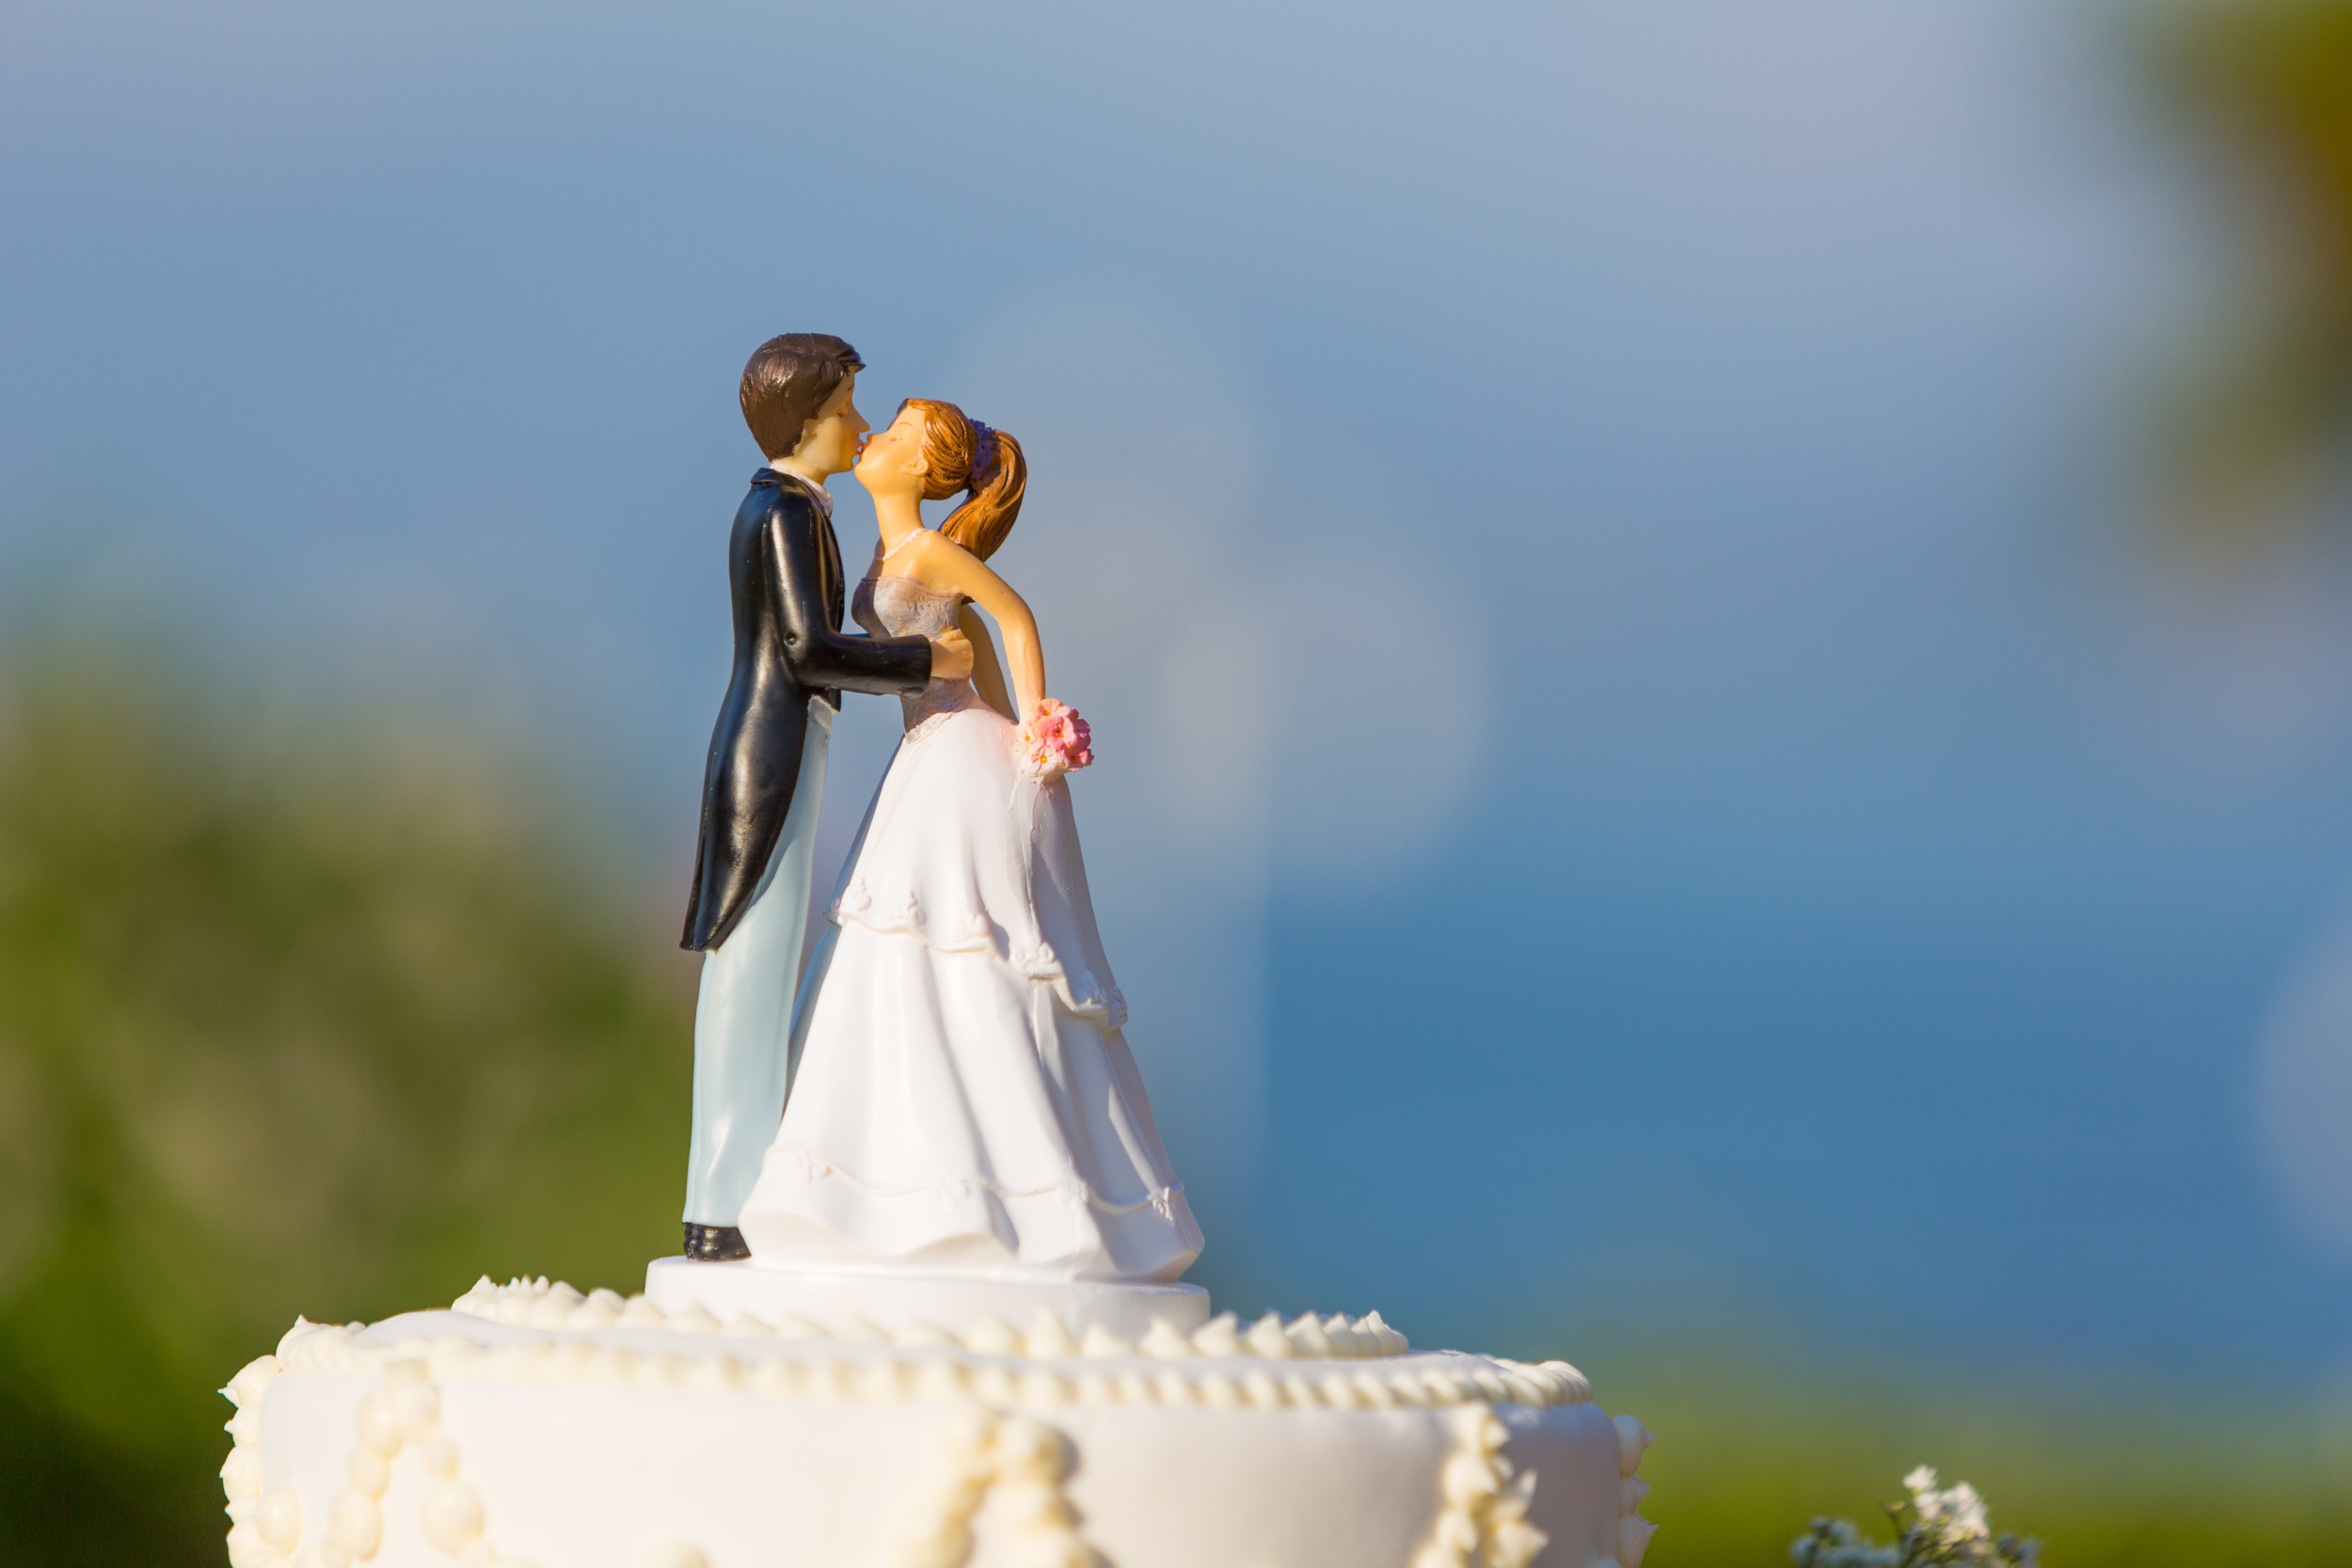 Wedding Cake Toppers With Bride's Underwear on Show Split Opinions Online